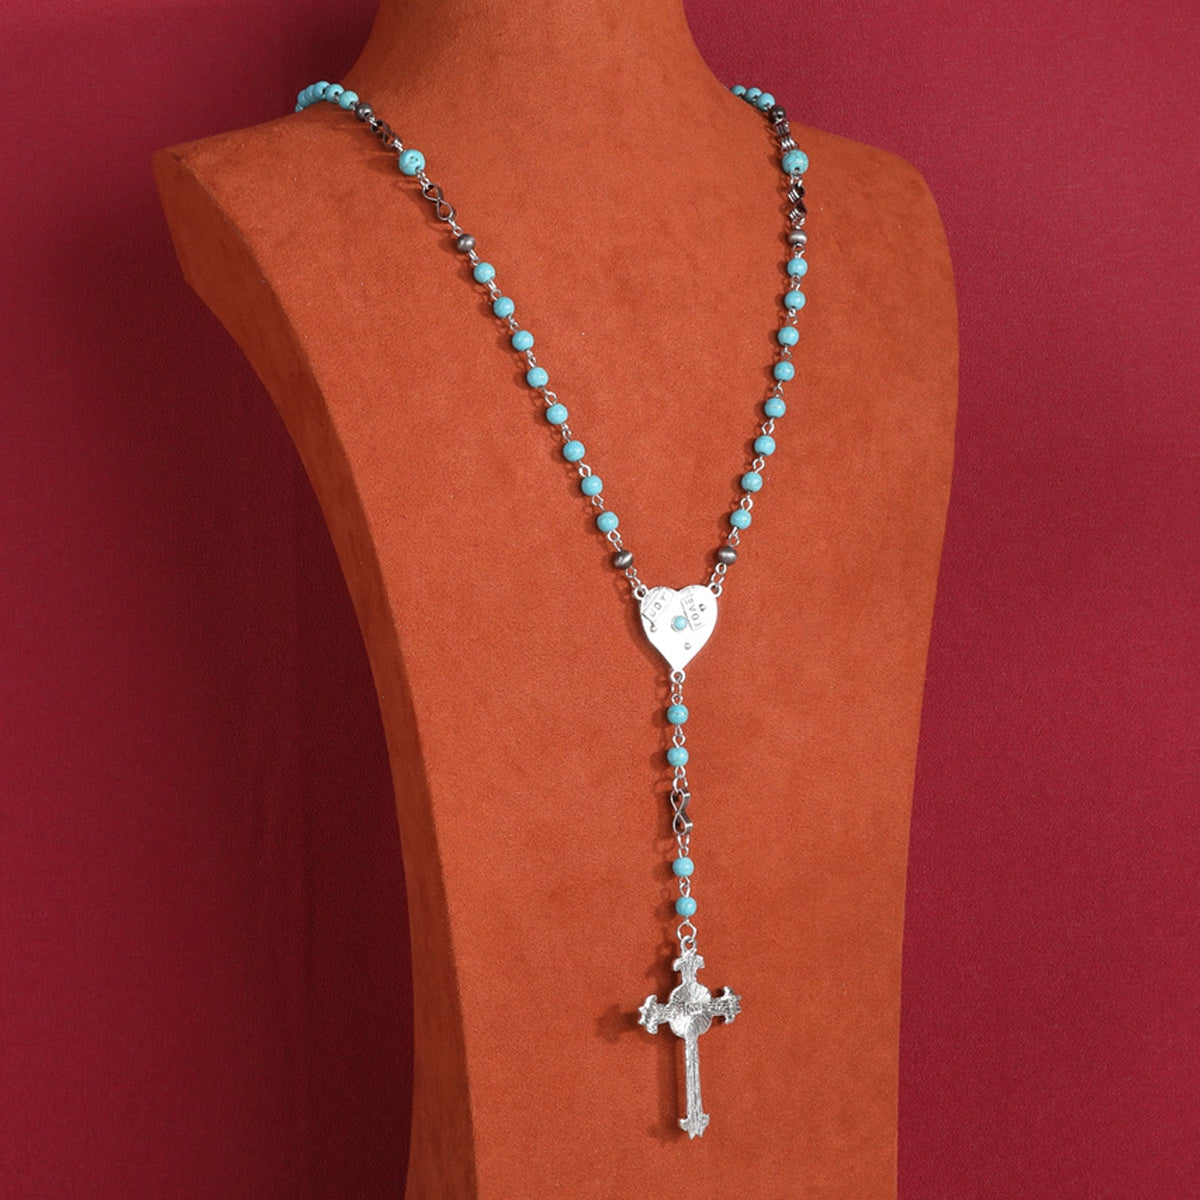 Rustic Couture's Beaded Heart Shape Cross Pendant Necklace